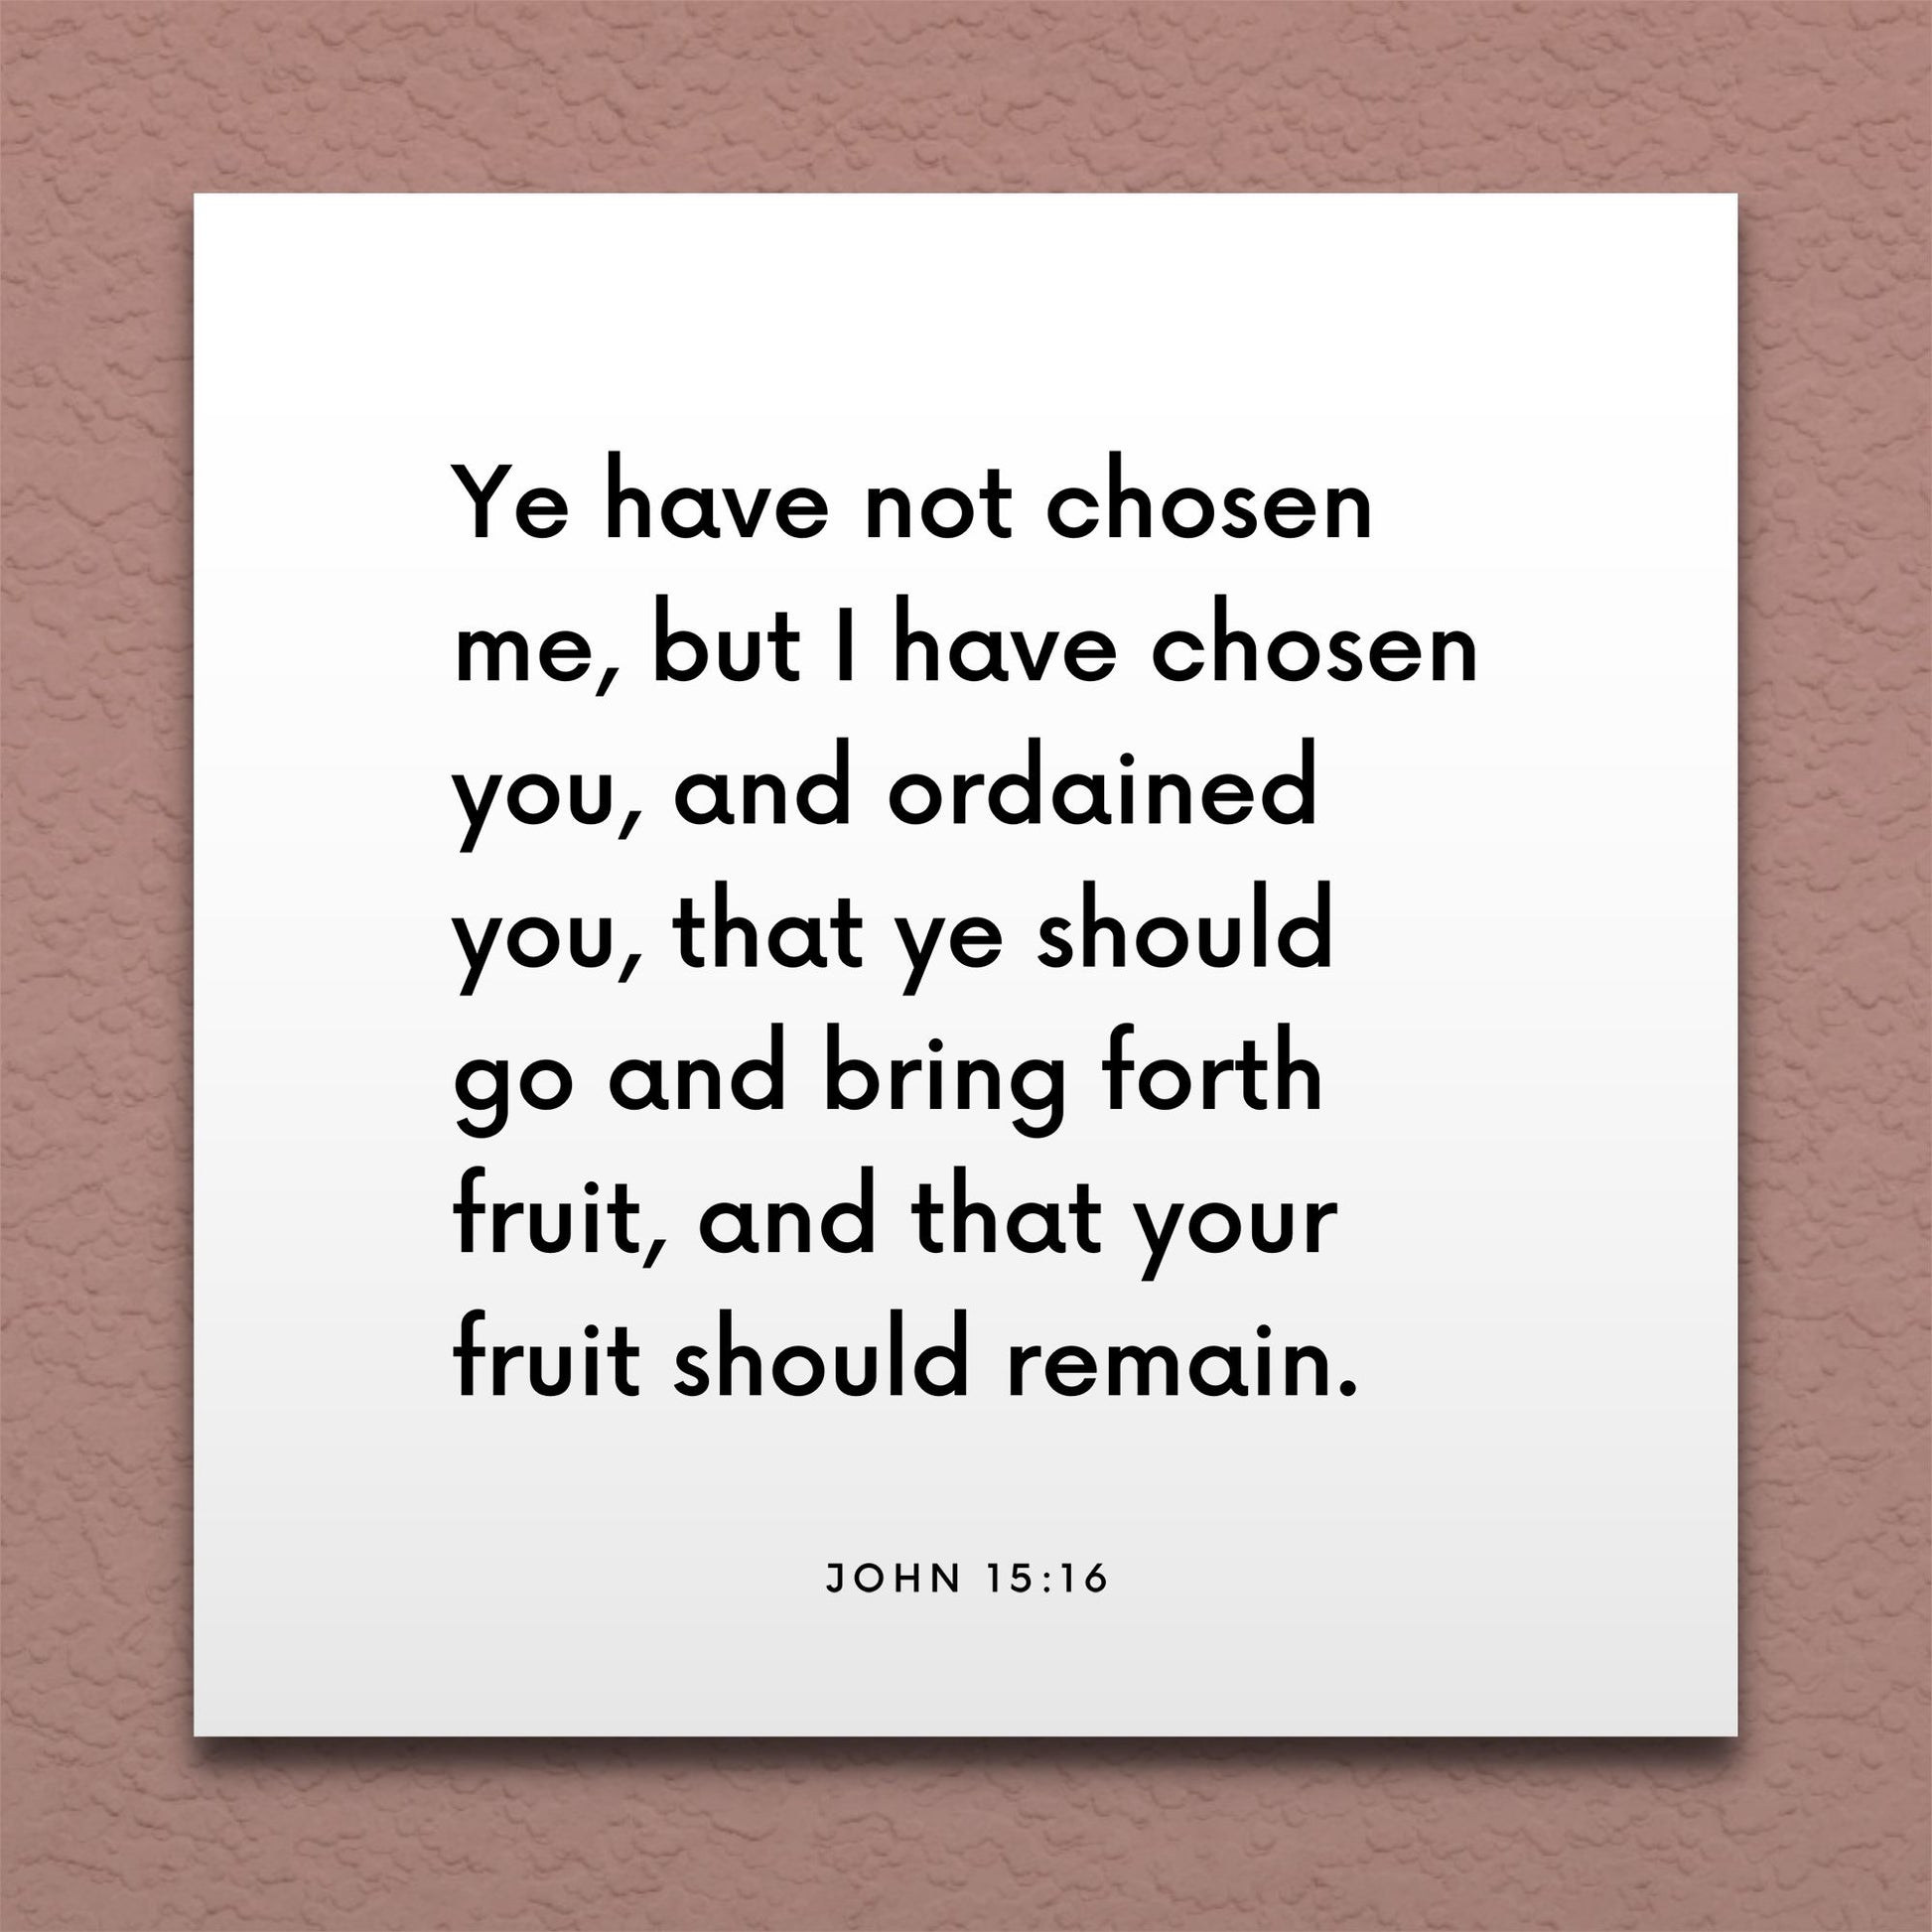 Wall-mounted scripture tile for John 15:16 - "Ye have not chosen me, but I have chosen you"